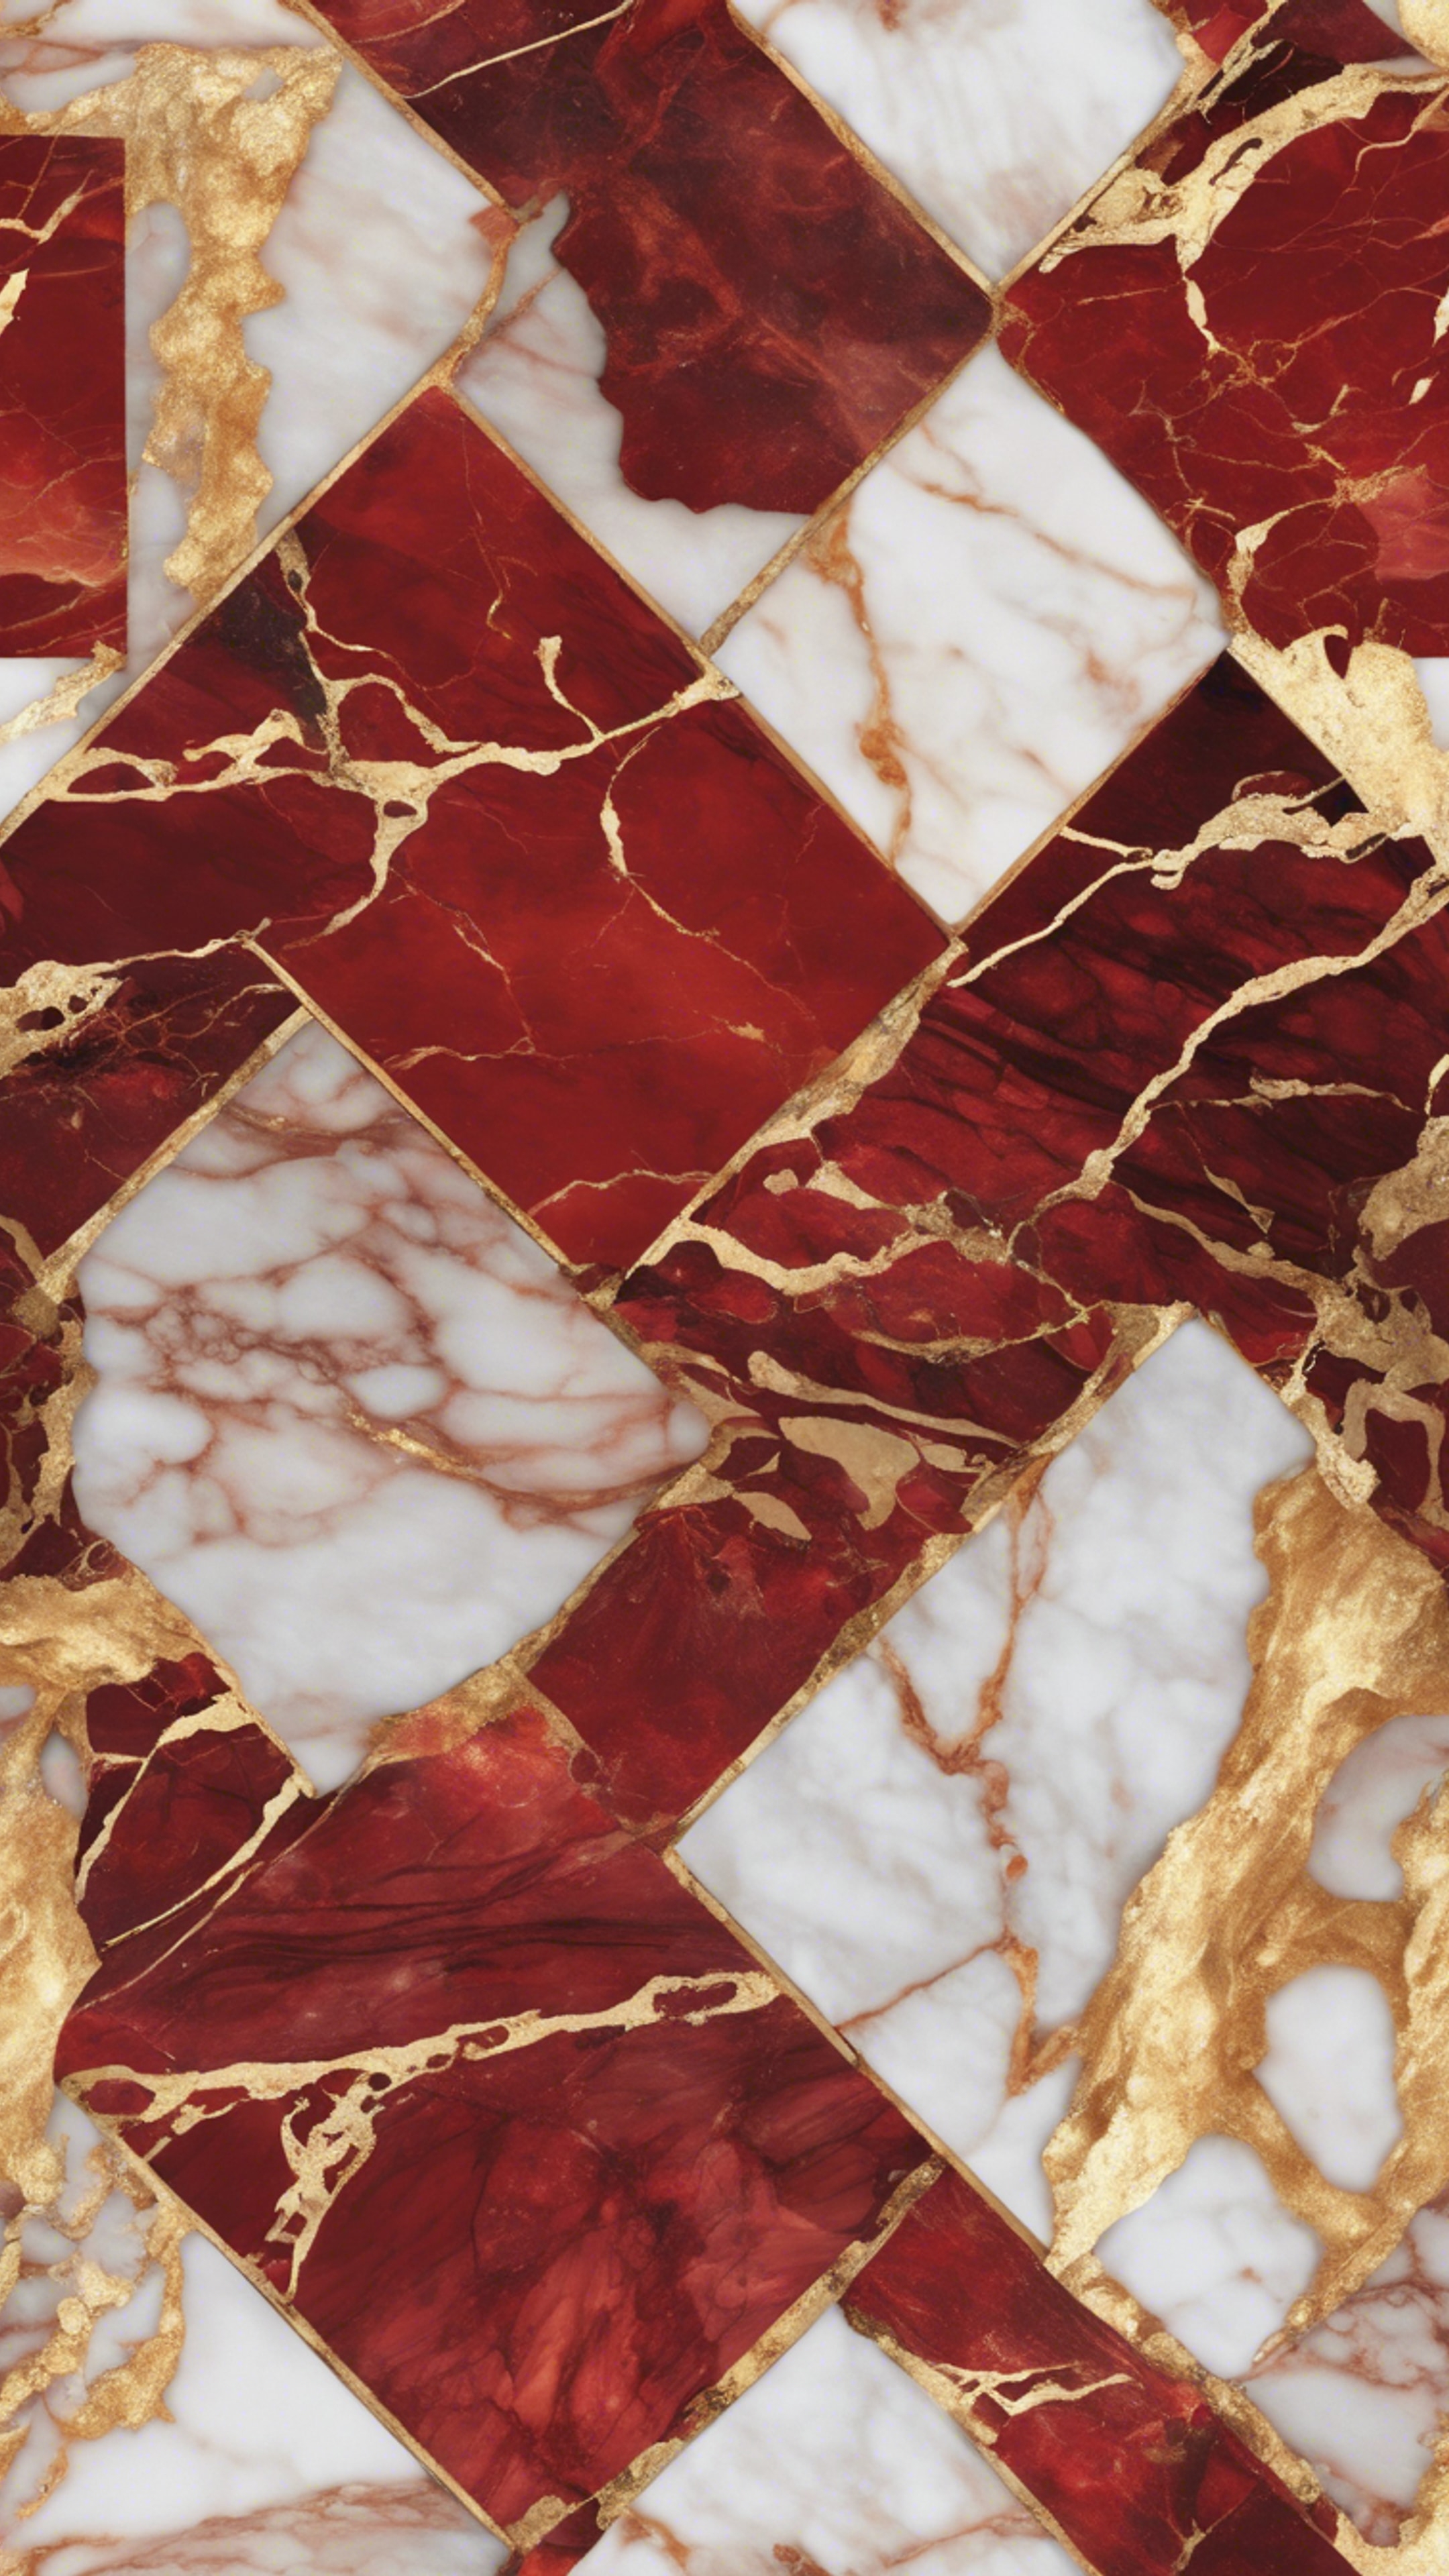 Seamless pattern of red and gold marble resembling the interior of an opulent mansion. Валлпапер[0c55d253d85d467eb81b]